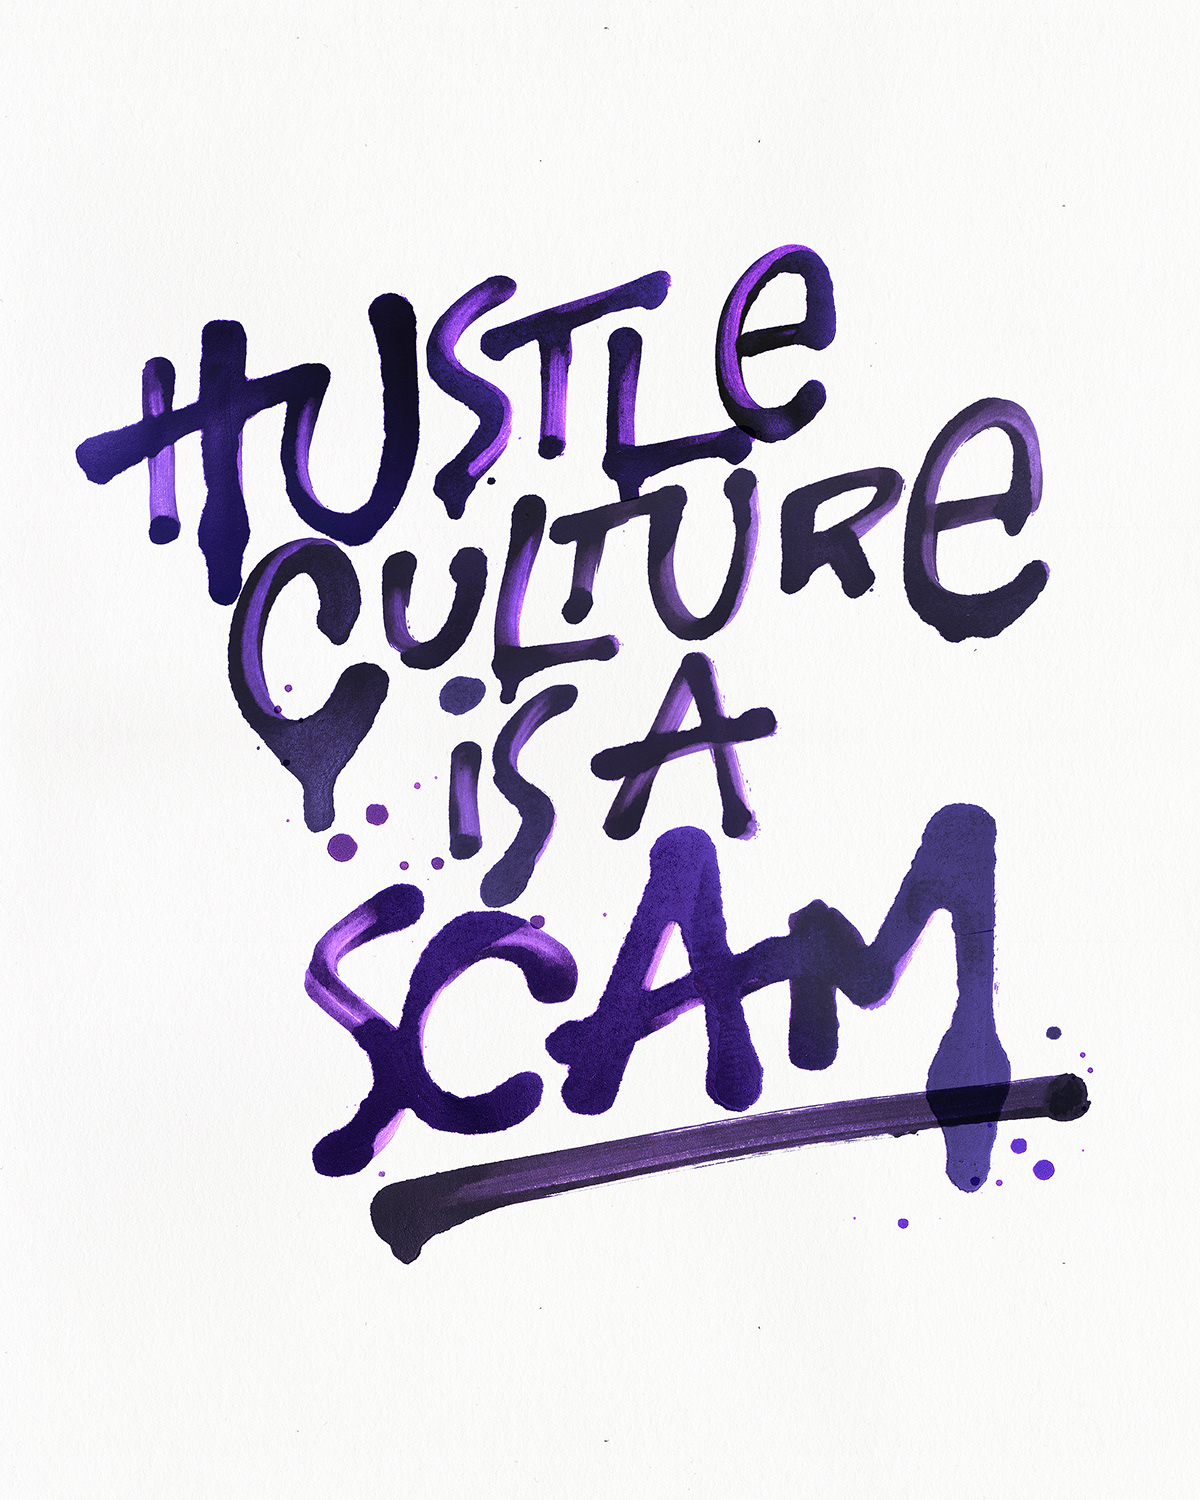 Advertising  campaign Graffiti hustle hustleculture lettering Lettering Design poster type typography  